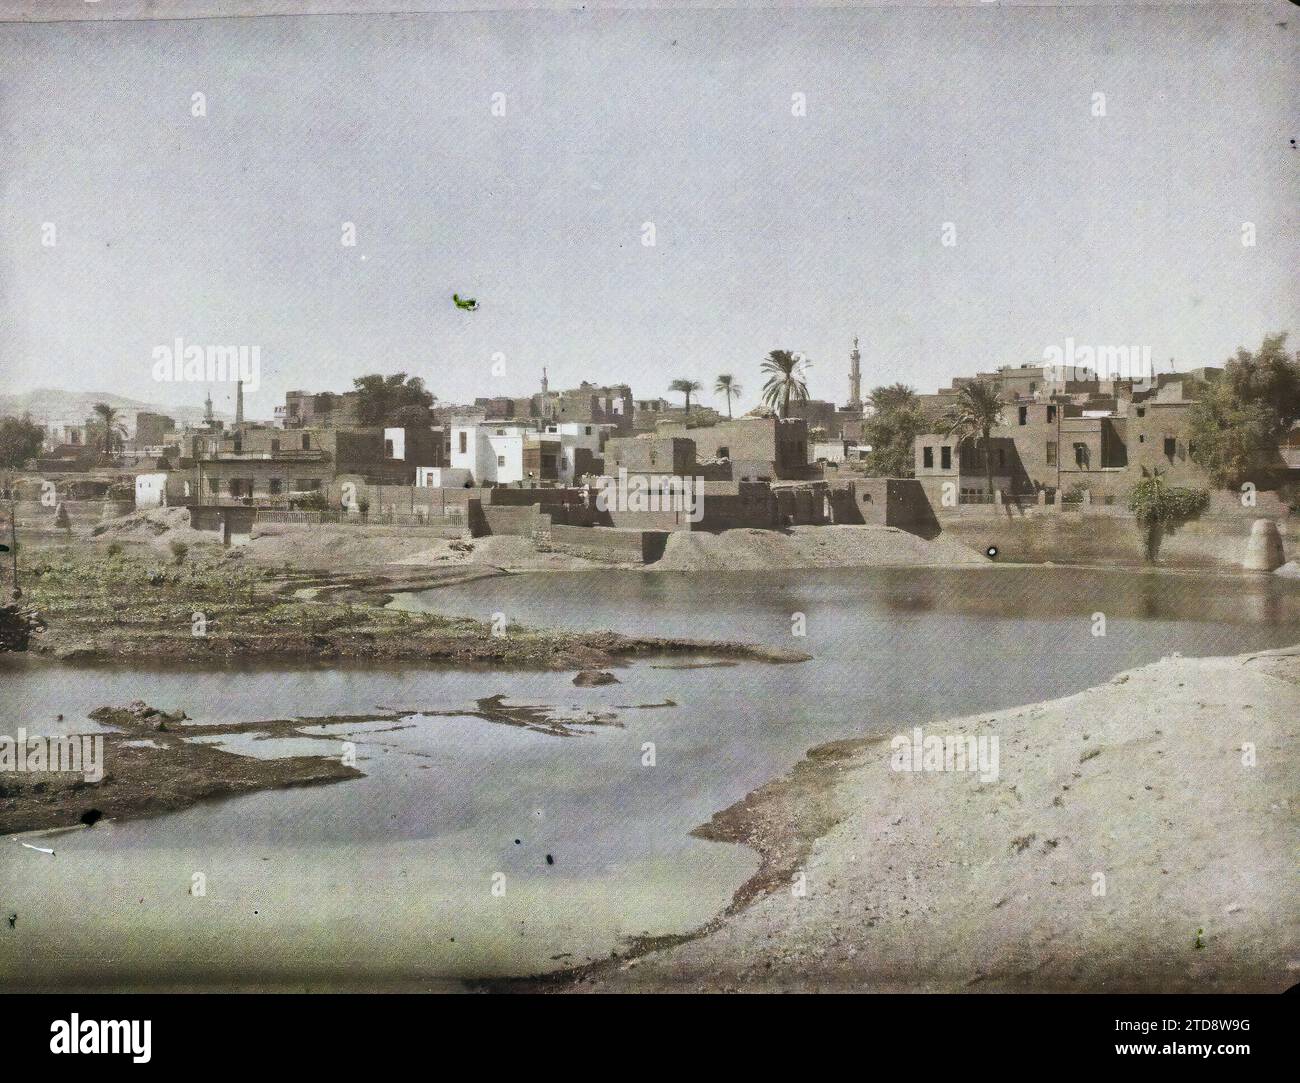 Assiut, Egypt, Africa Panorama of the city, Housing, Architecture, River, Minaret, Housing, Panorama of urban area, Egypt, Assiut, Assiout, 01/01/1918 - 31/12/1918, Castelnau, Paul, 1918 - Middle East, Egypte, Palestine, Chypre - Paul Castelnau (Photographic section of the army) - (9 January-6 October), Autochrome, photo, Glass, Autochrome, photo, Positive, Horizontal, Size 9 x 12 cm Stock Photo